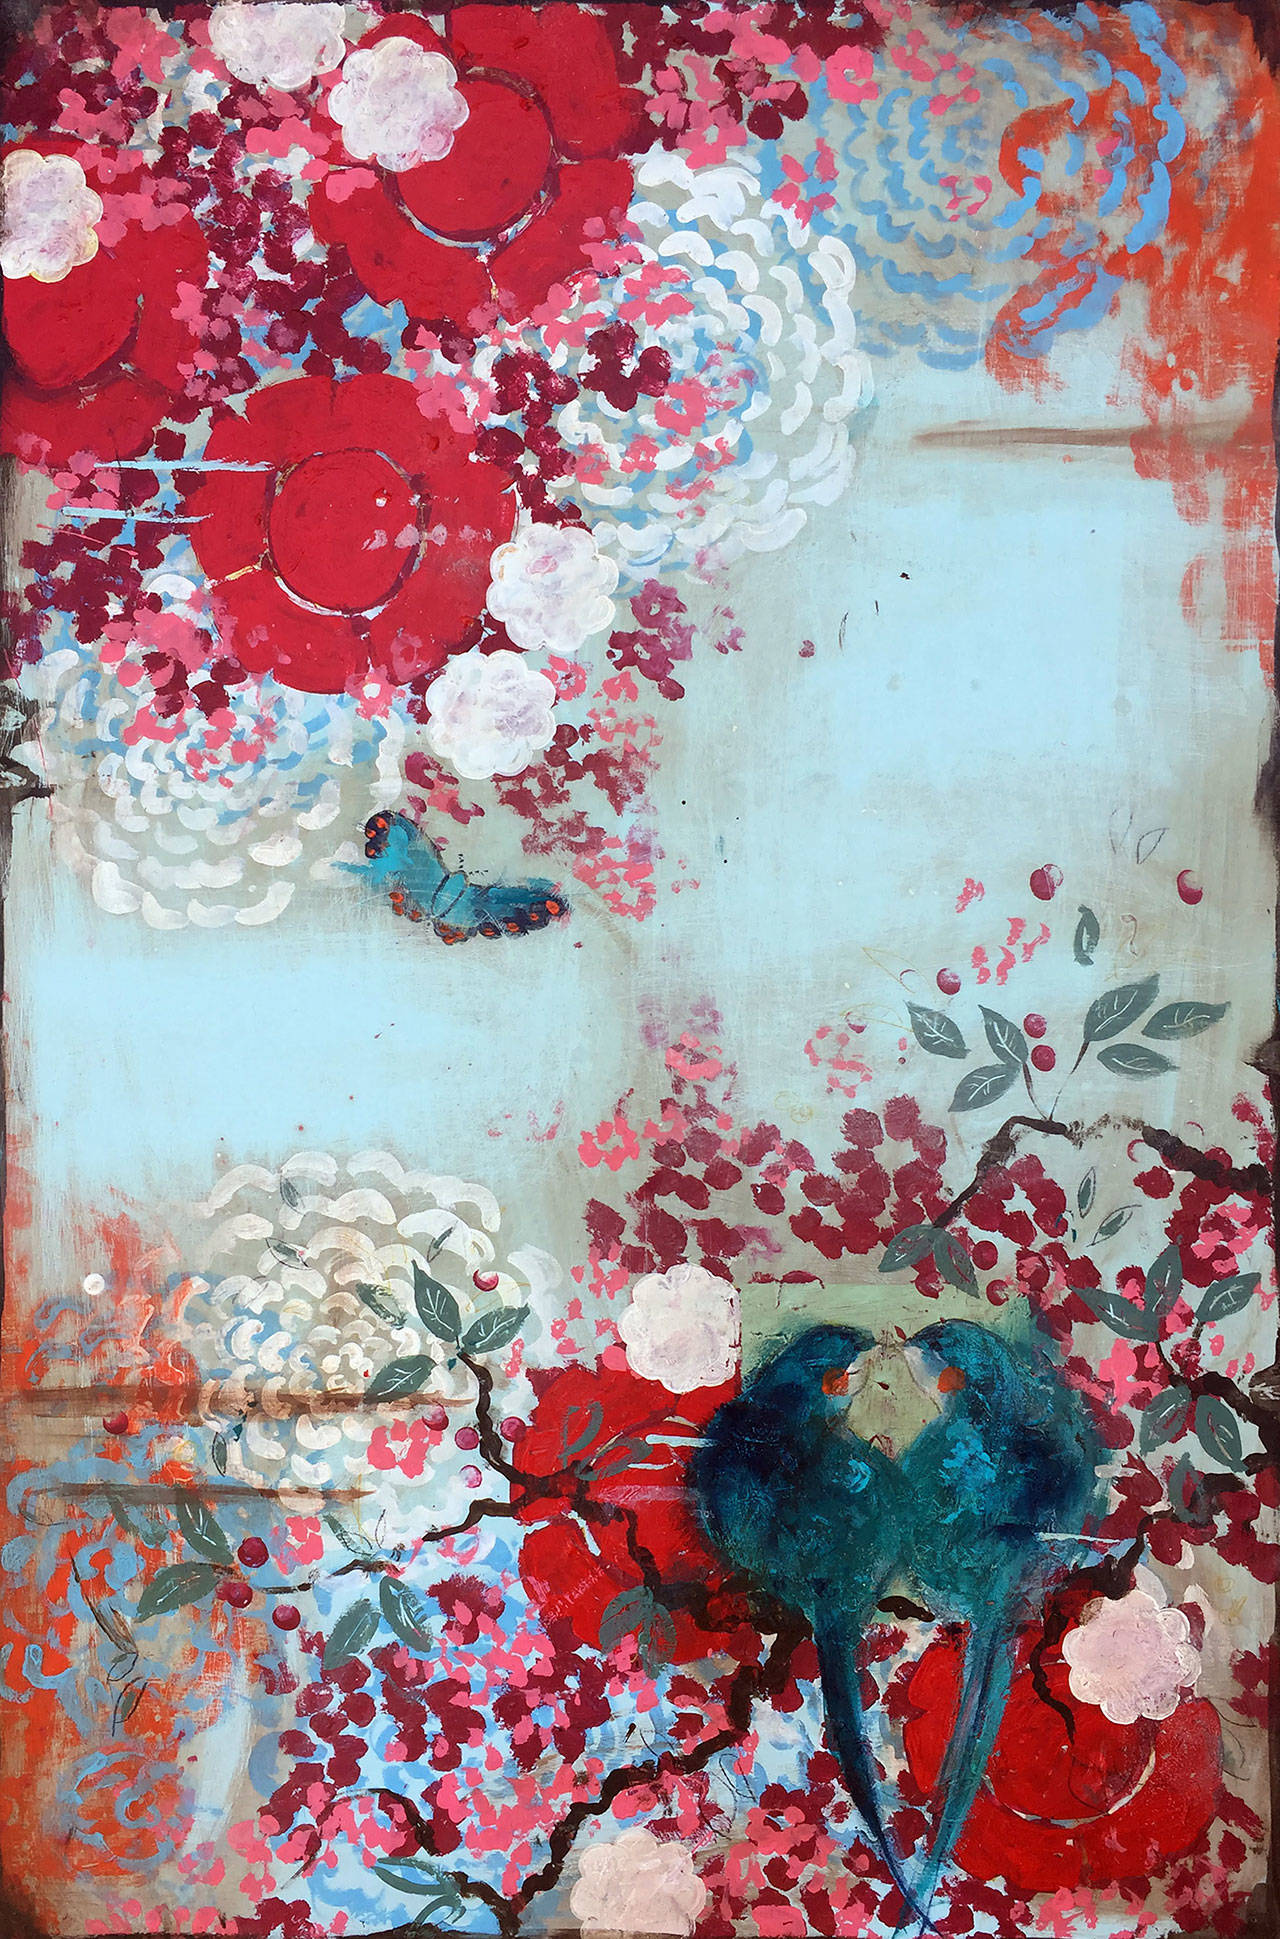 The paintings of Kathe Fraga will be on display at Roby King Gallery in June. (Image courtesy of Roby King Gallery)